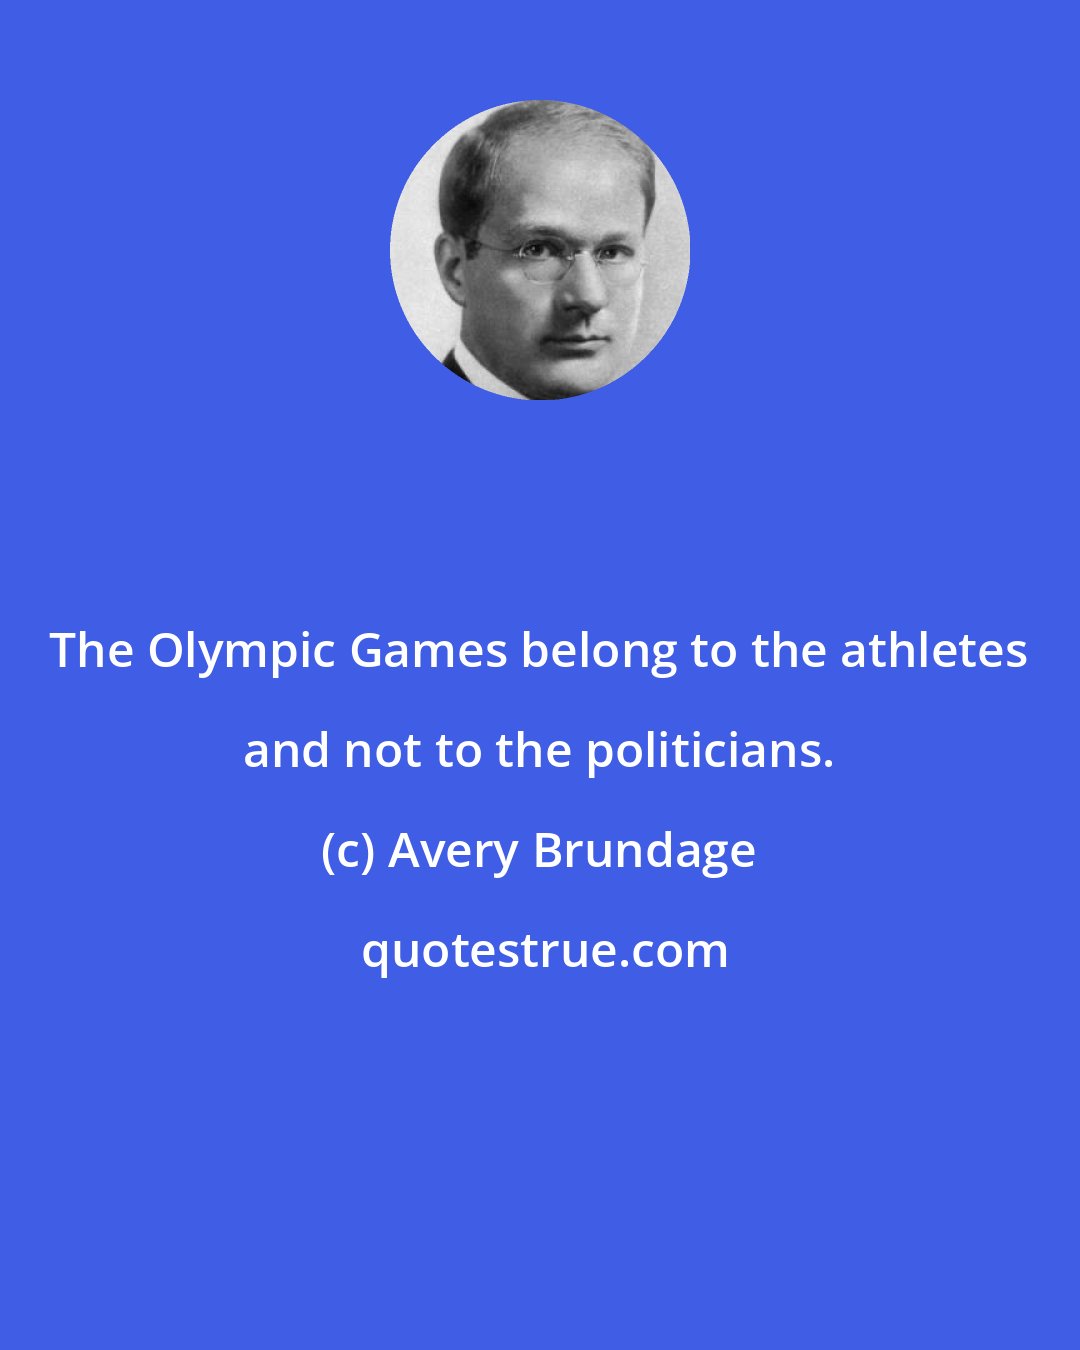 Avery Brundage: The Olympic Games belong to the athletes and not to the politicians.